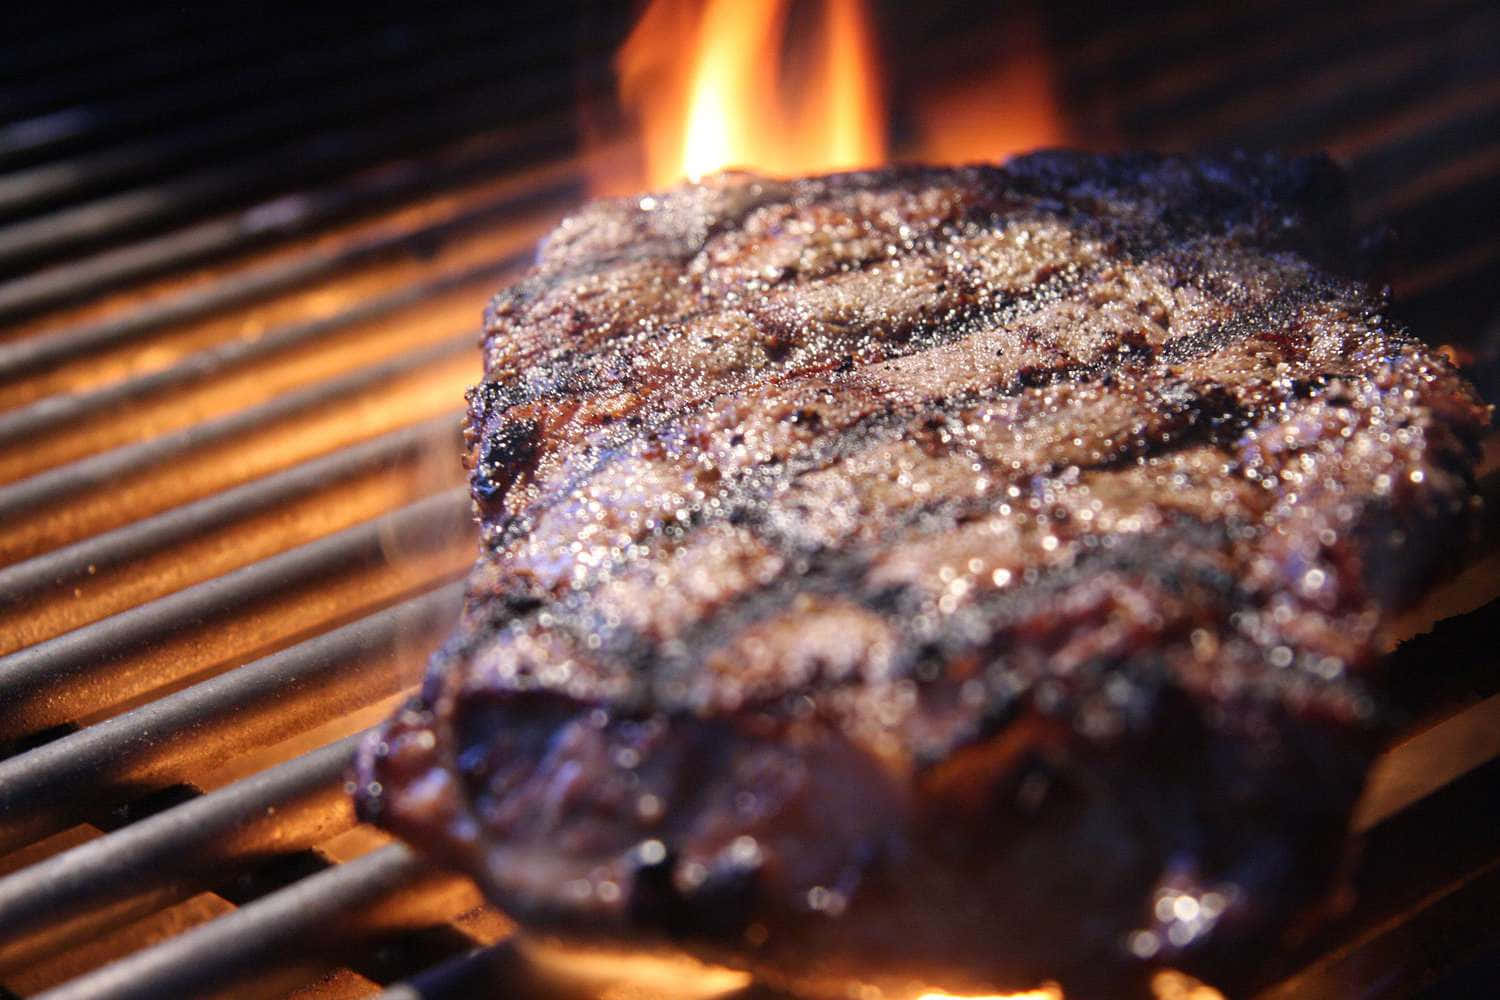 A Steak Is On A Grill